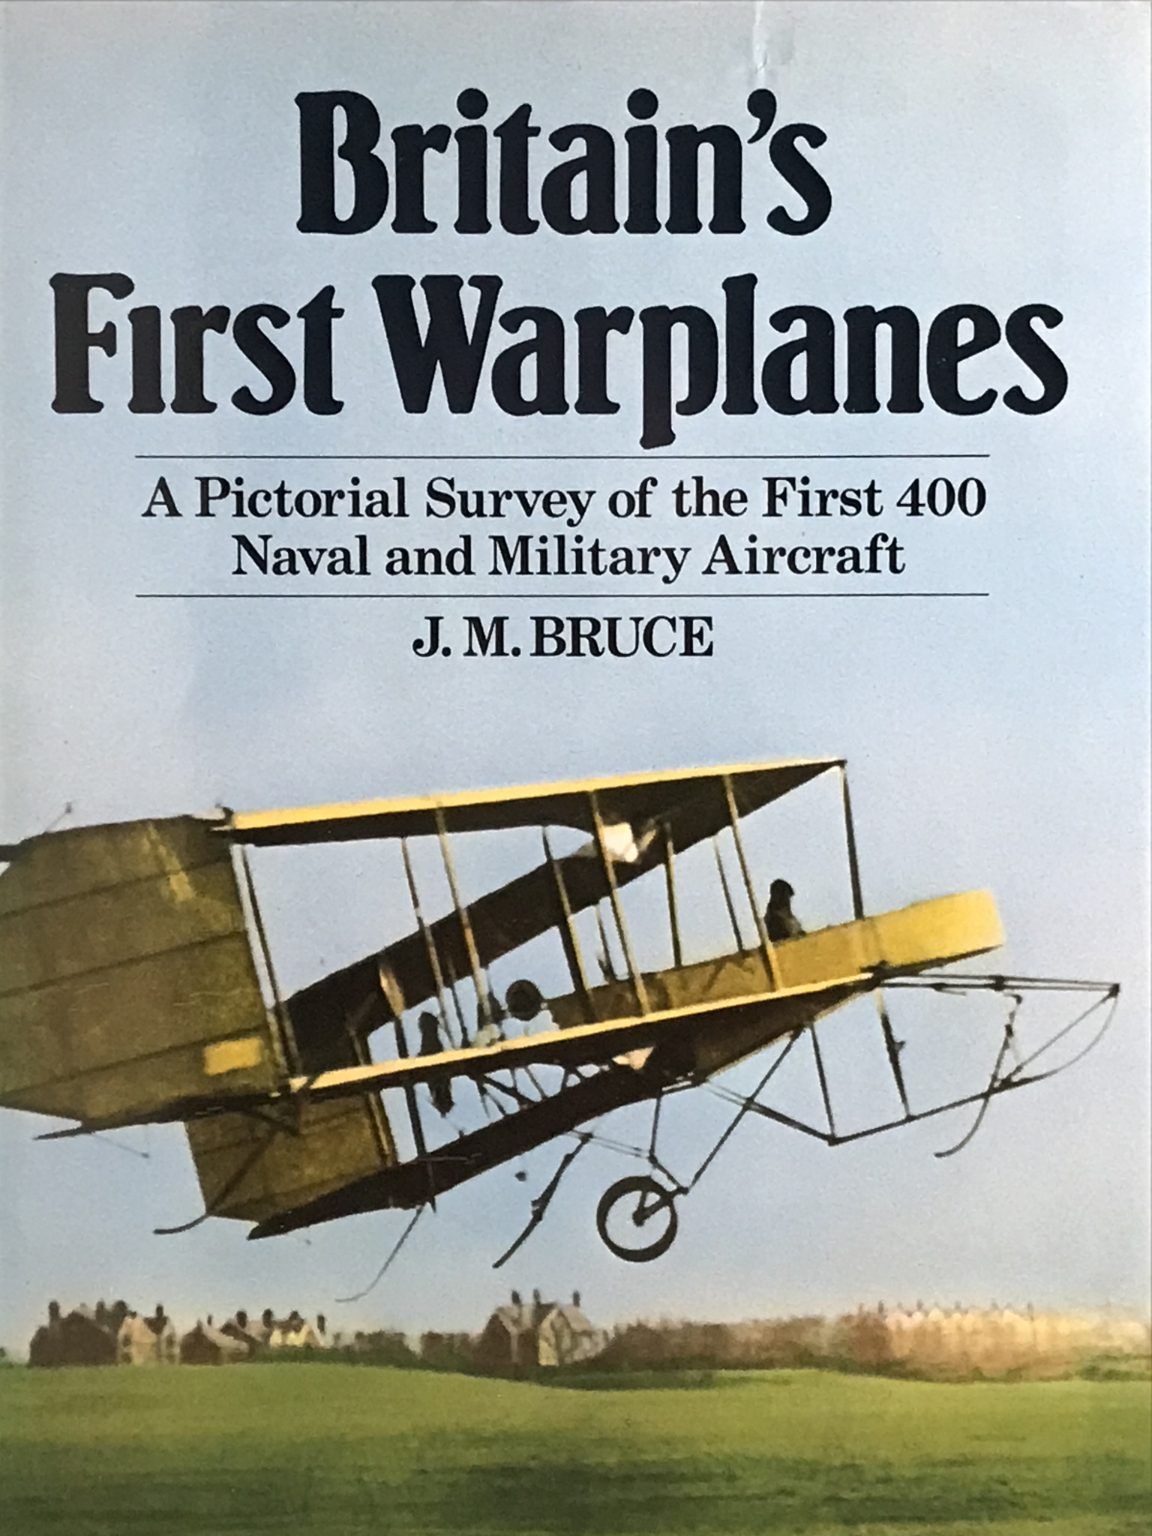 BRITAIN'S FIRST WARPLANES: A survey of the first 400 Naval and Military Aircraft